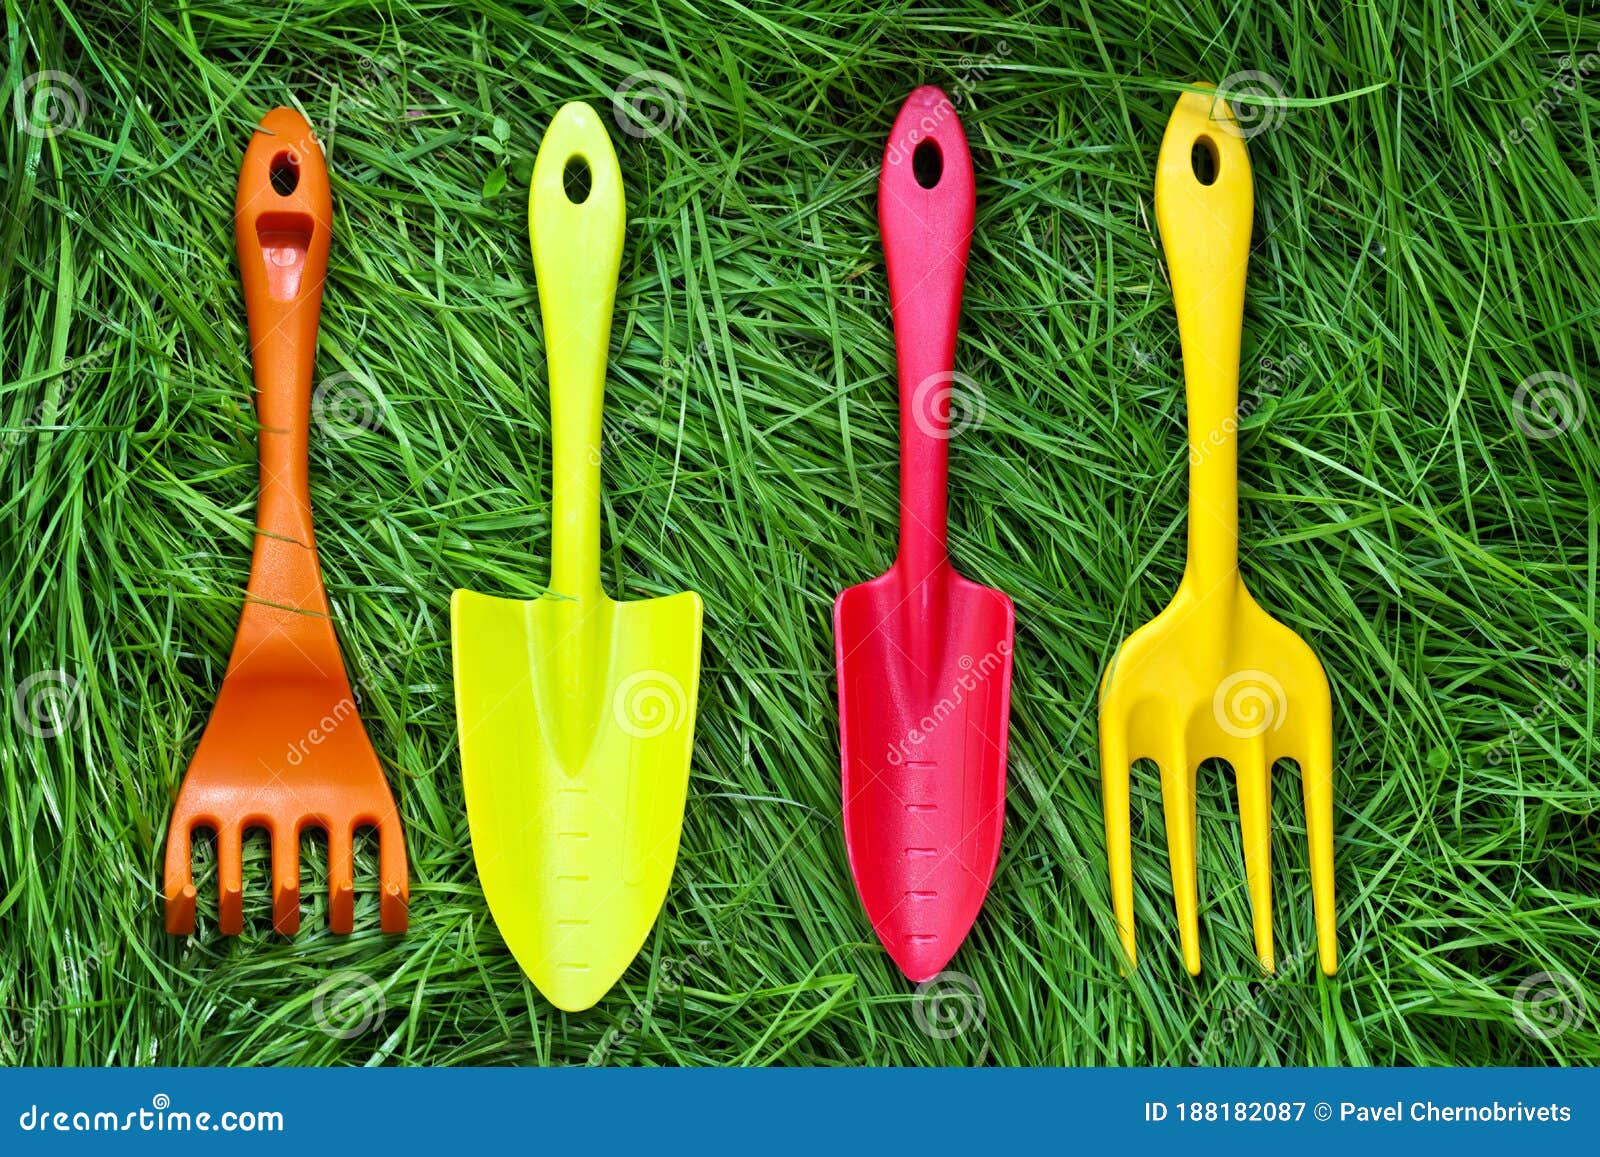 Set of Gardening Tools on Grass Stock Image - Image of grass, hobby ...